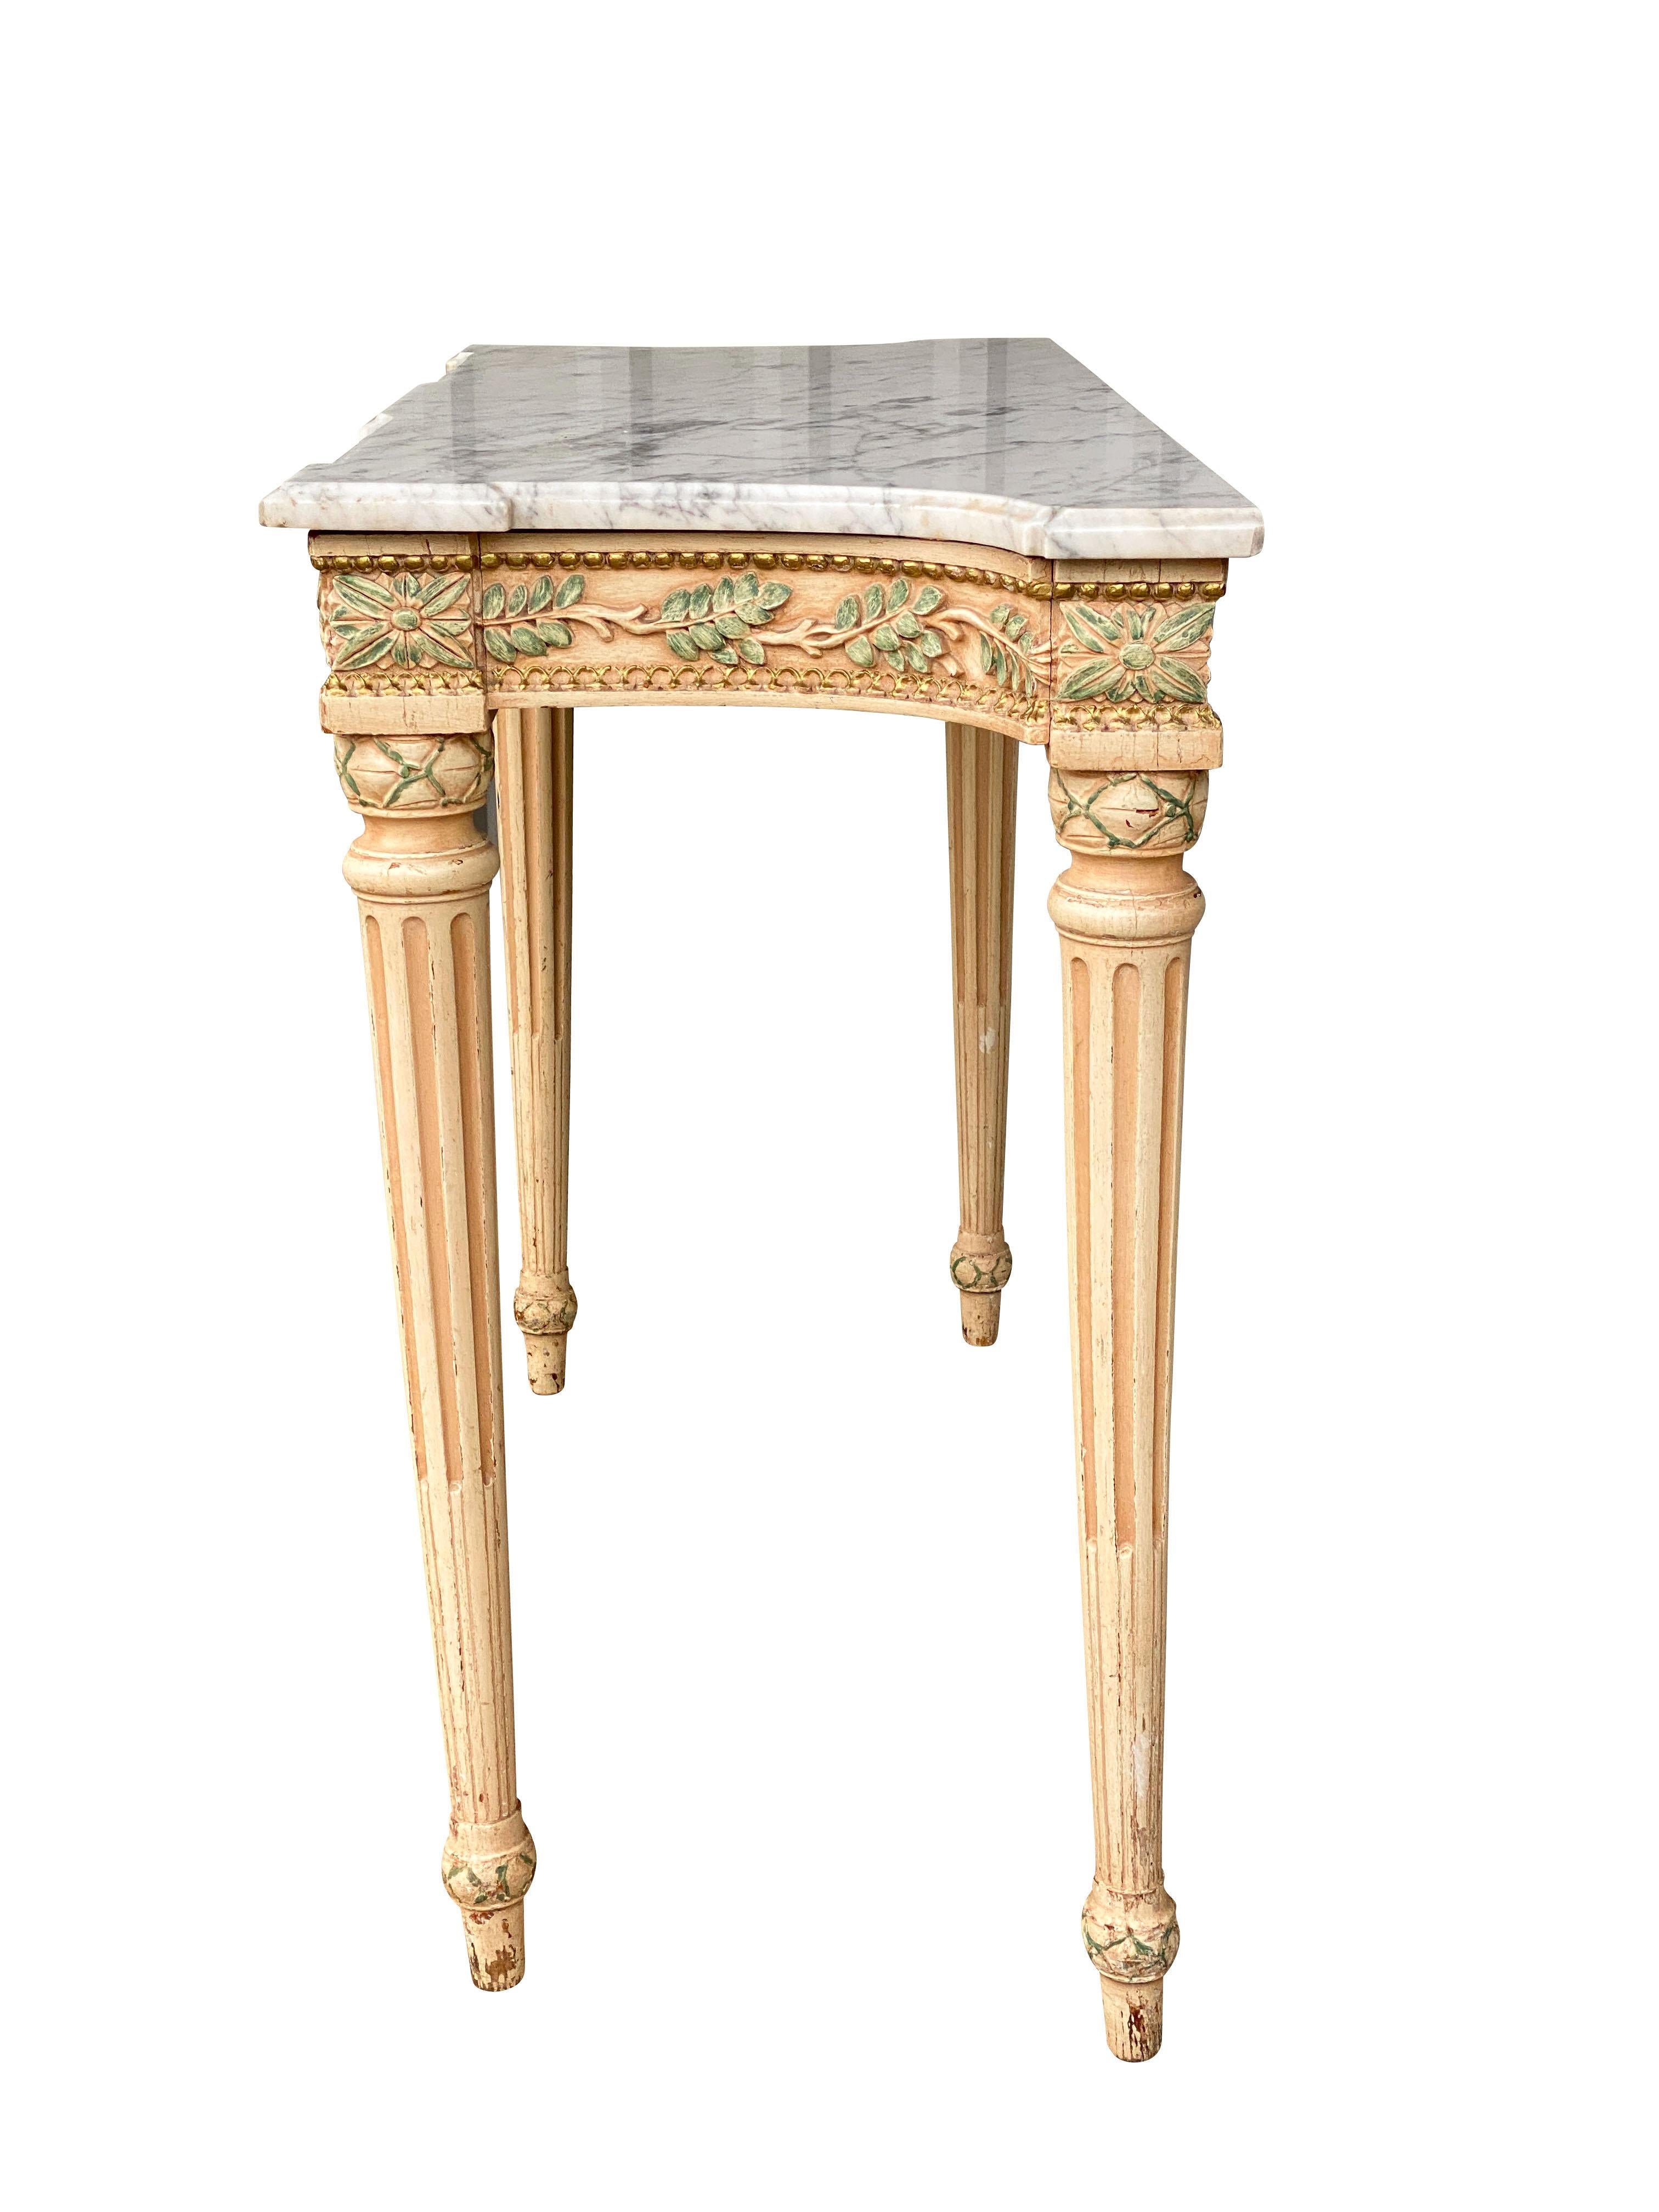 French Maison Jansen Louis XVI Style Marble-Top Console Table